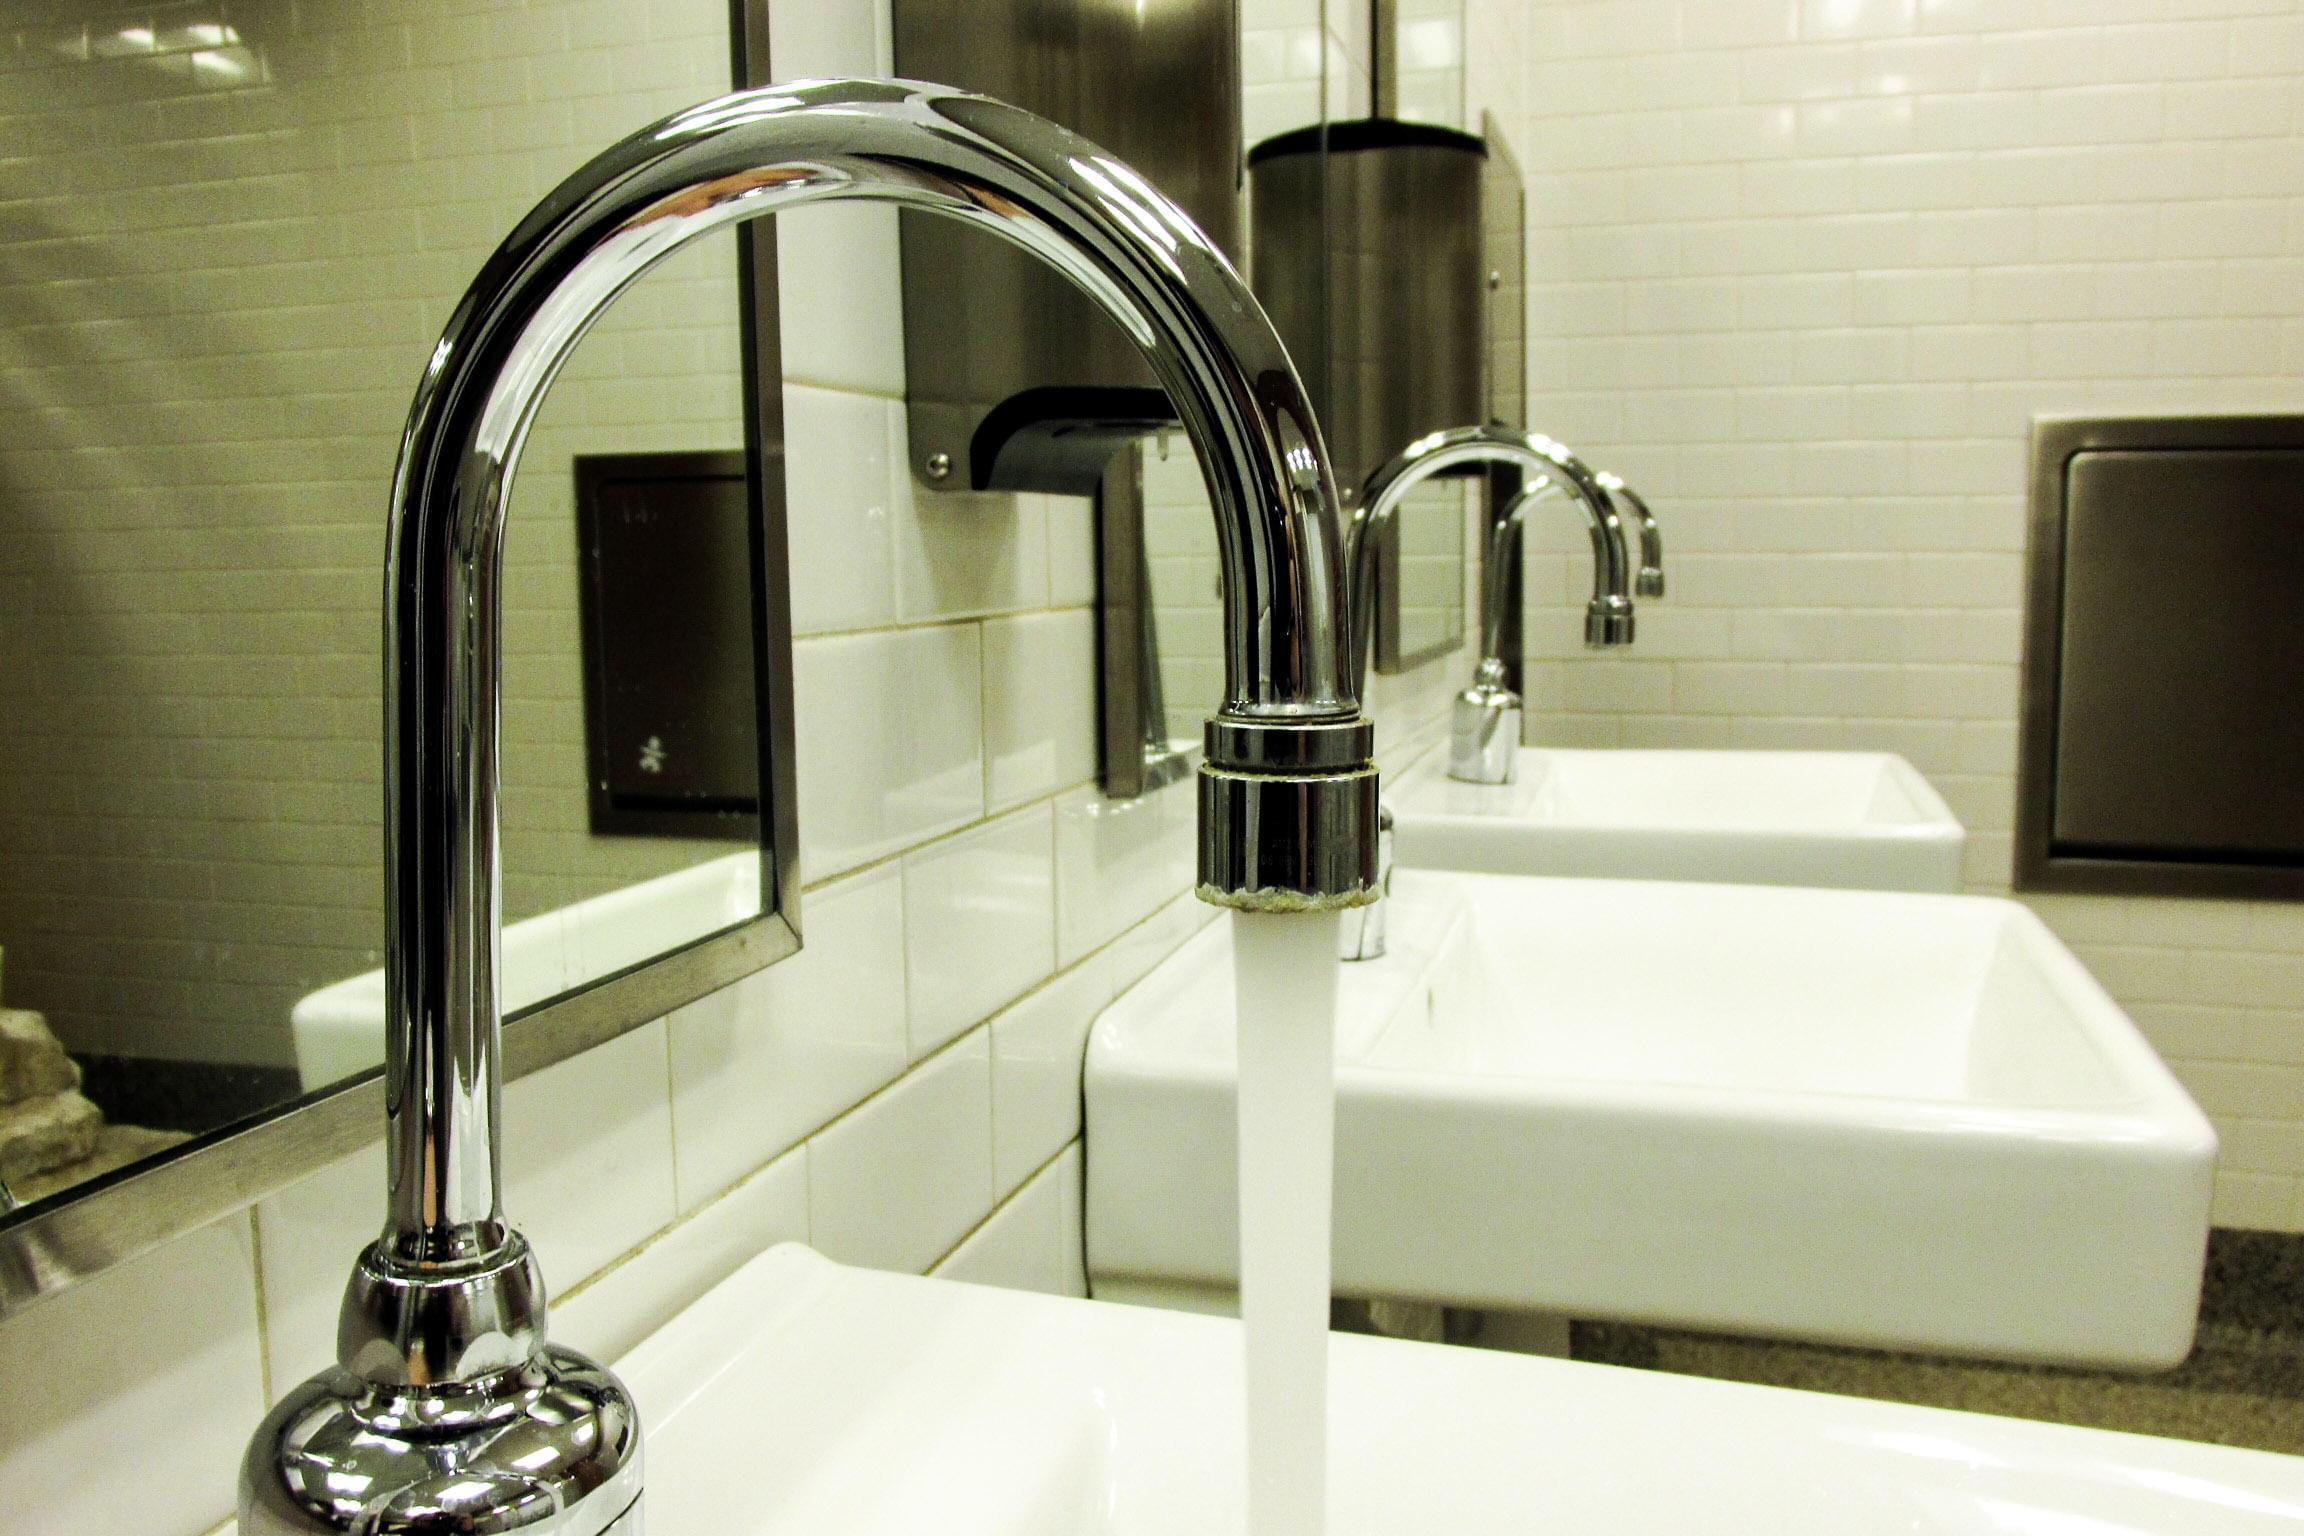 A report released last fall revealed elevated levels of lead in samples from 43 sinks and six drinking fountains Unit 4 school buildings.